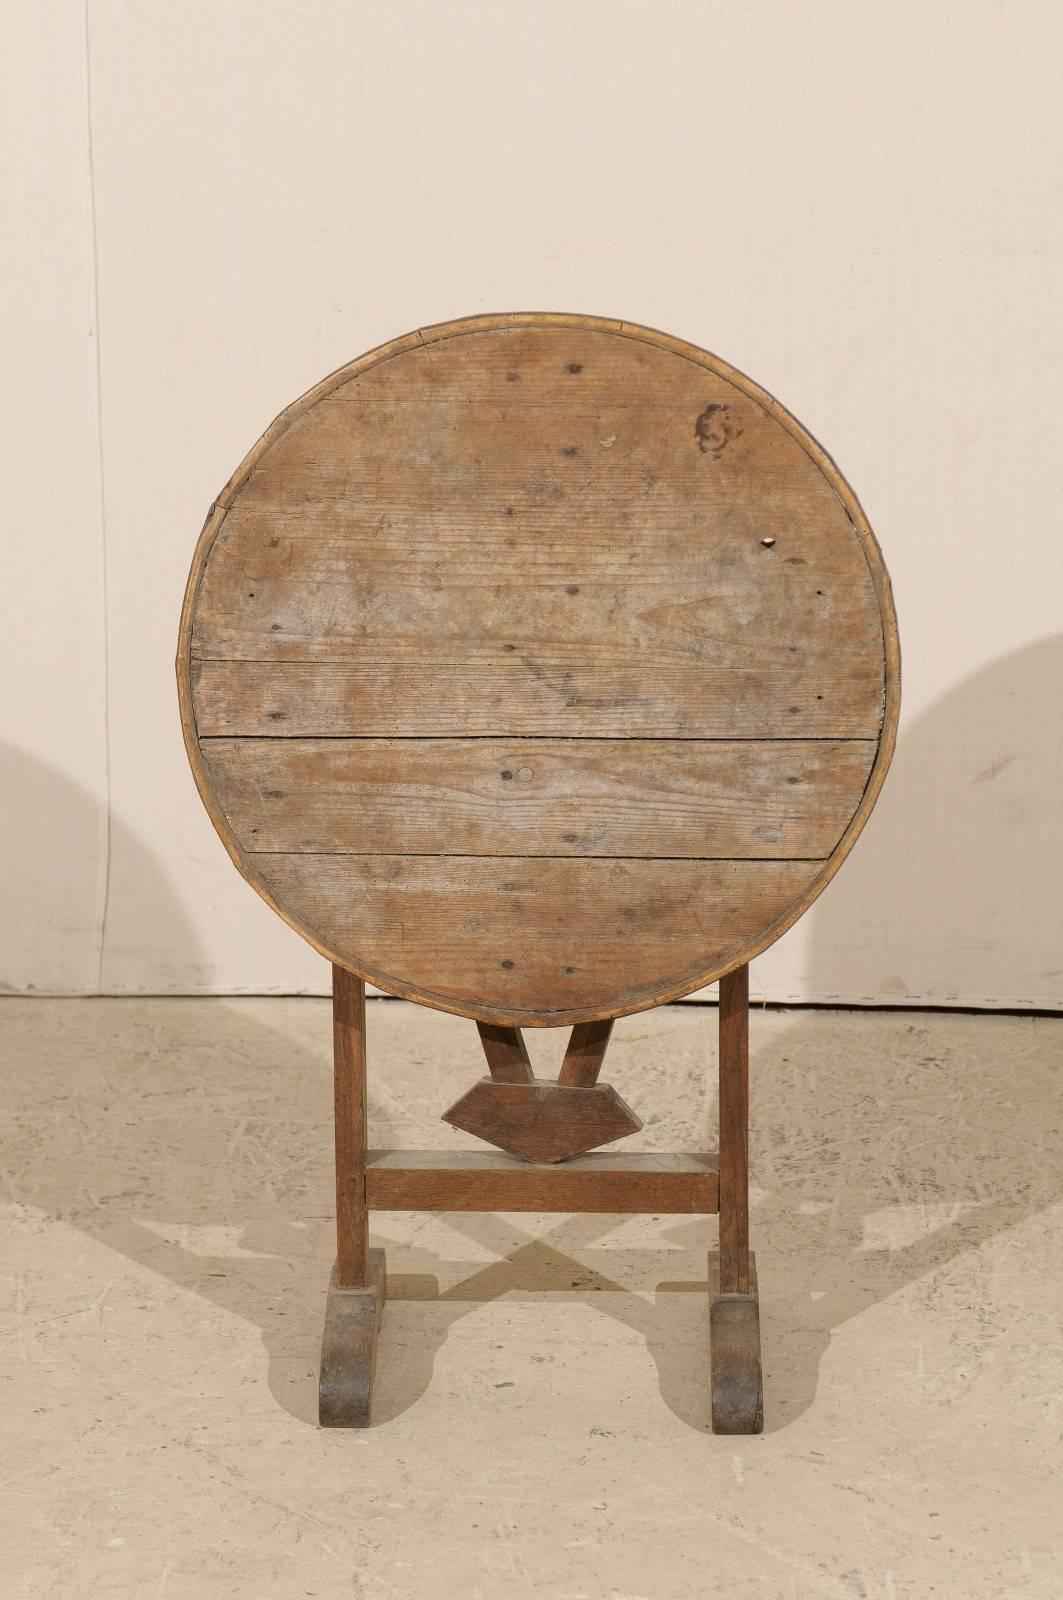 A petite sized French 19th century round wine tasting table. This rustic French wood table is unusually small and very cute! This table features a tilt-top, typical of wine tasting tables, along with a butterfly wedge which turns to support its top.